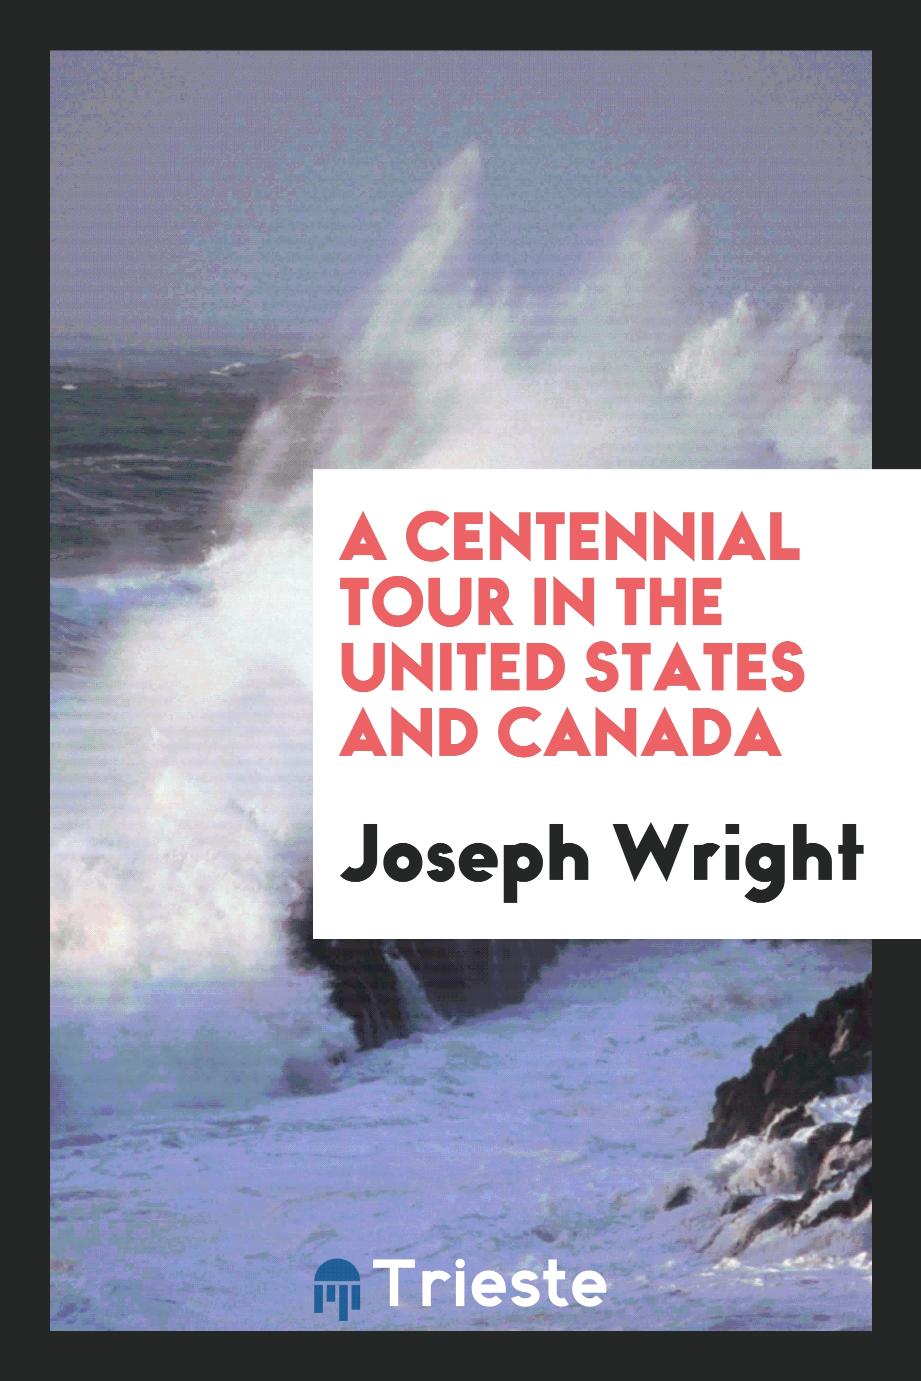 A Centennial Tour in the United States and Canada